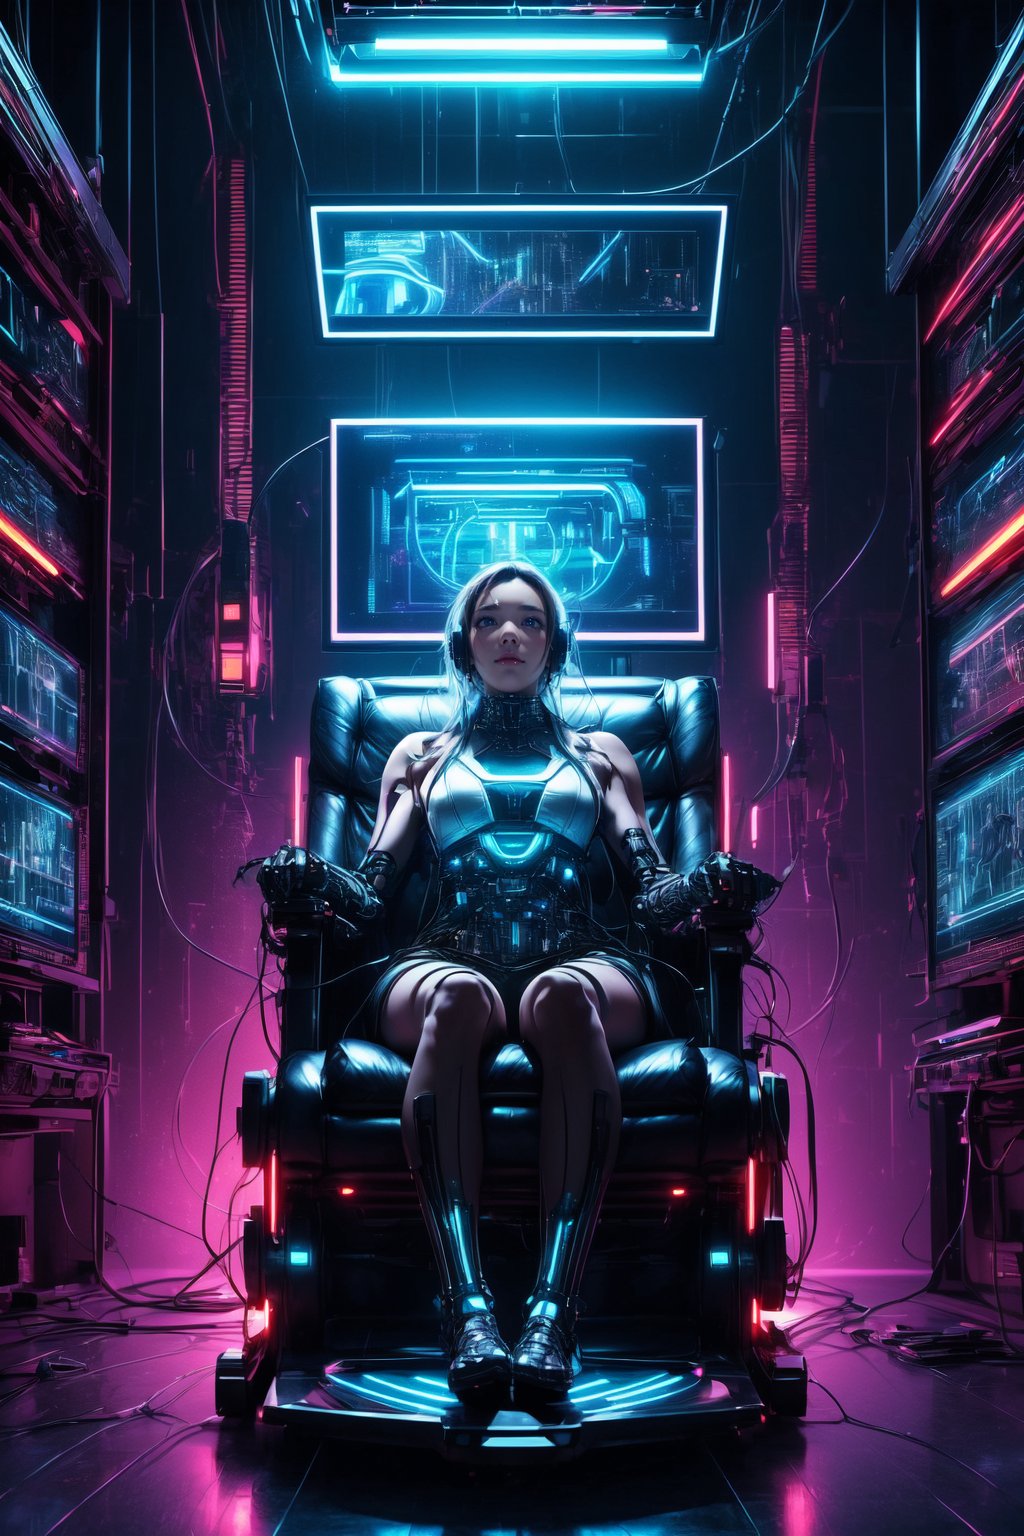 High-quality, ultra-realistic digital painting, 64K HDR, luminously lit cyberpunk lab setting with a female figure clad in mecha-style armor seated in a power chair, encircled by advanced cables and high-tech devices, balanced composition, (Cyberpunk theme:1.4), (Armored techno-girl:1.3), (power chair:1.2), created by FuturEvoLab, cutting-edge technology, sleek metallic surfaces, vivid neon contrasts, lively environment, forward-looking design.